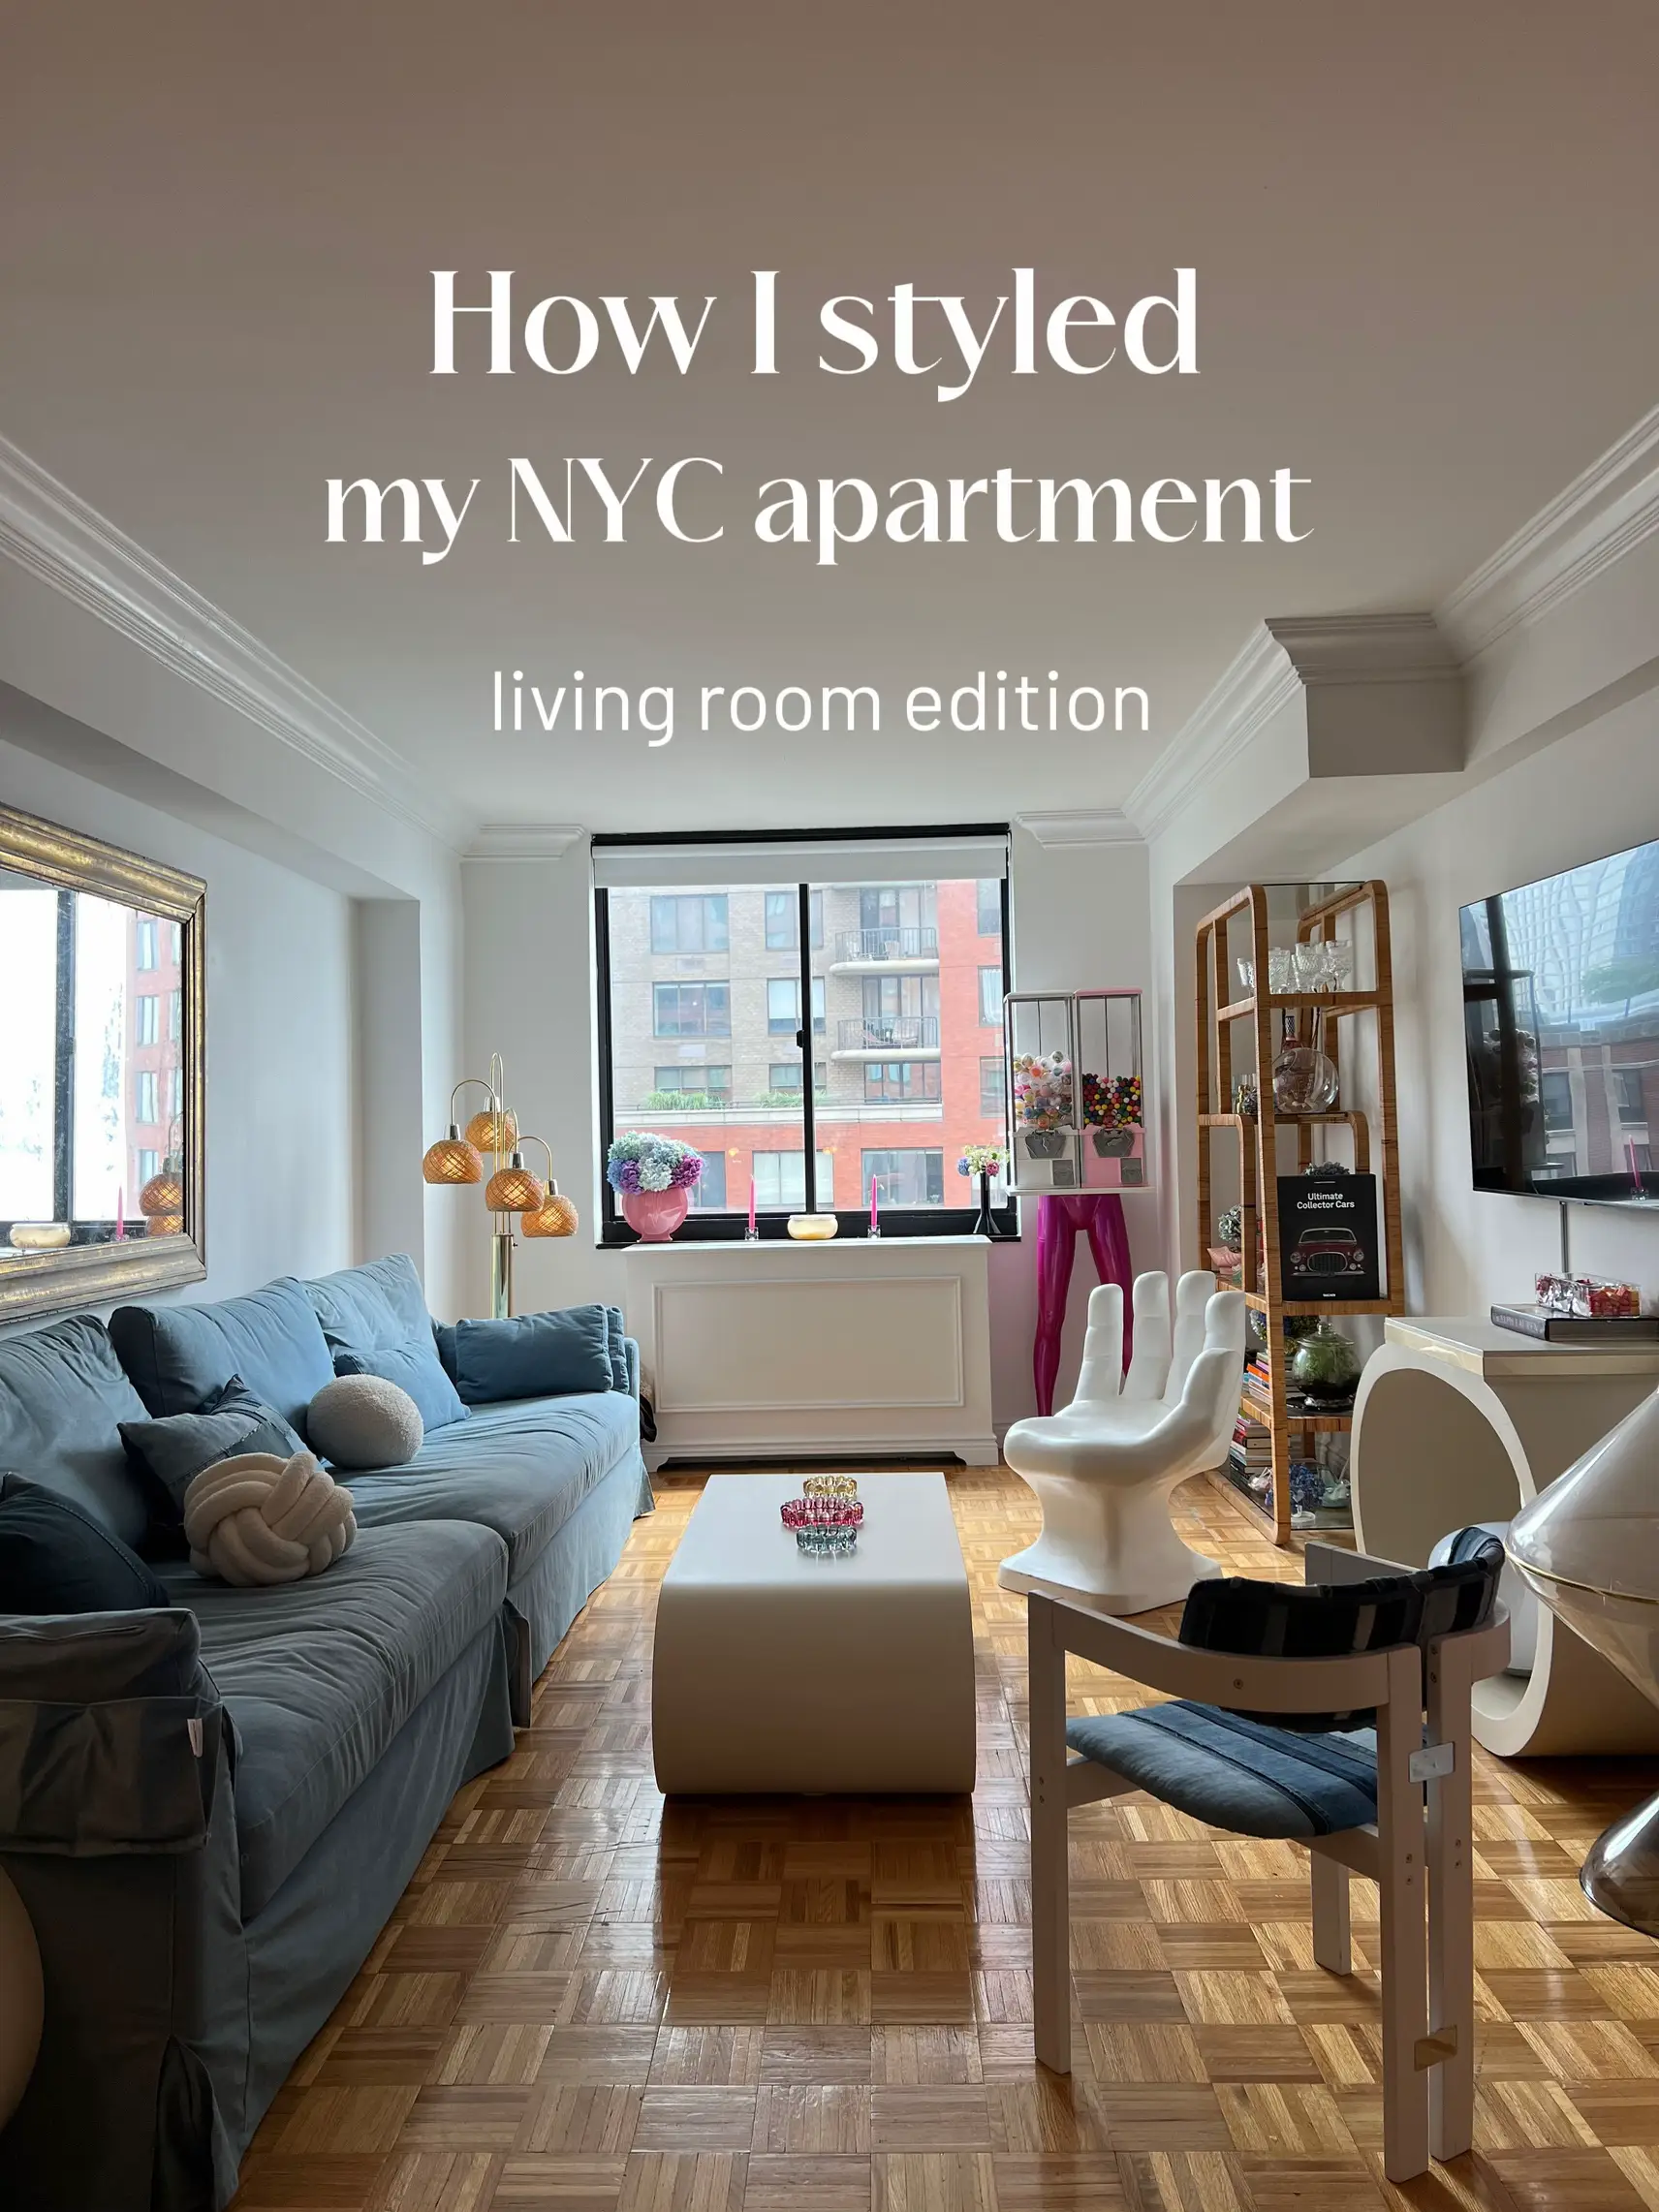 APARTMENT FINDS - MAKEUP ORG, Gallery posted by Jordyn Friedman